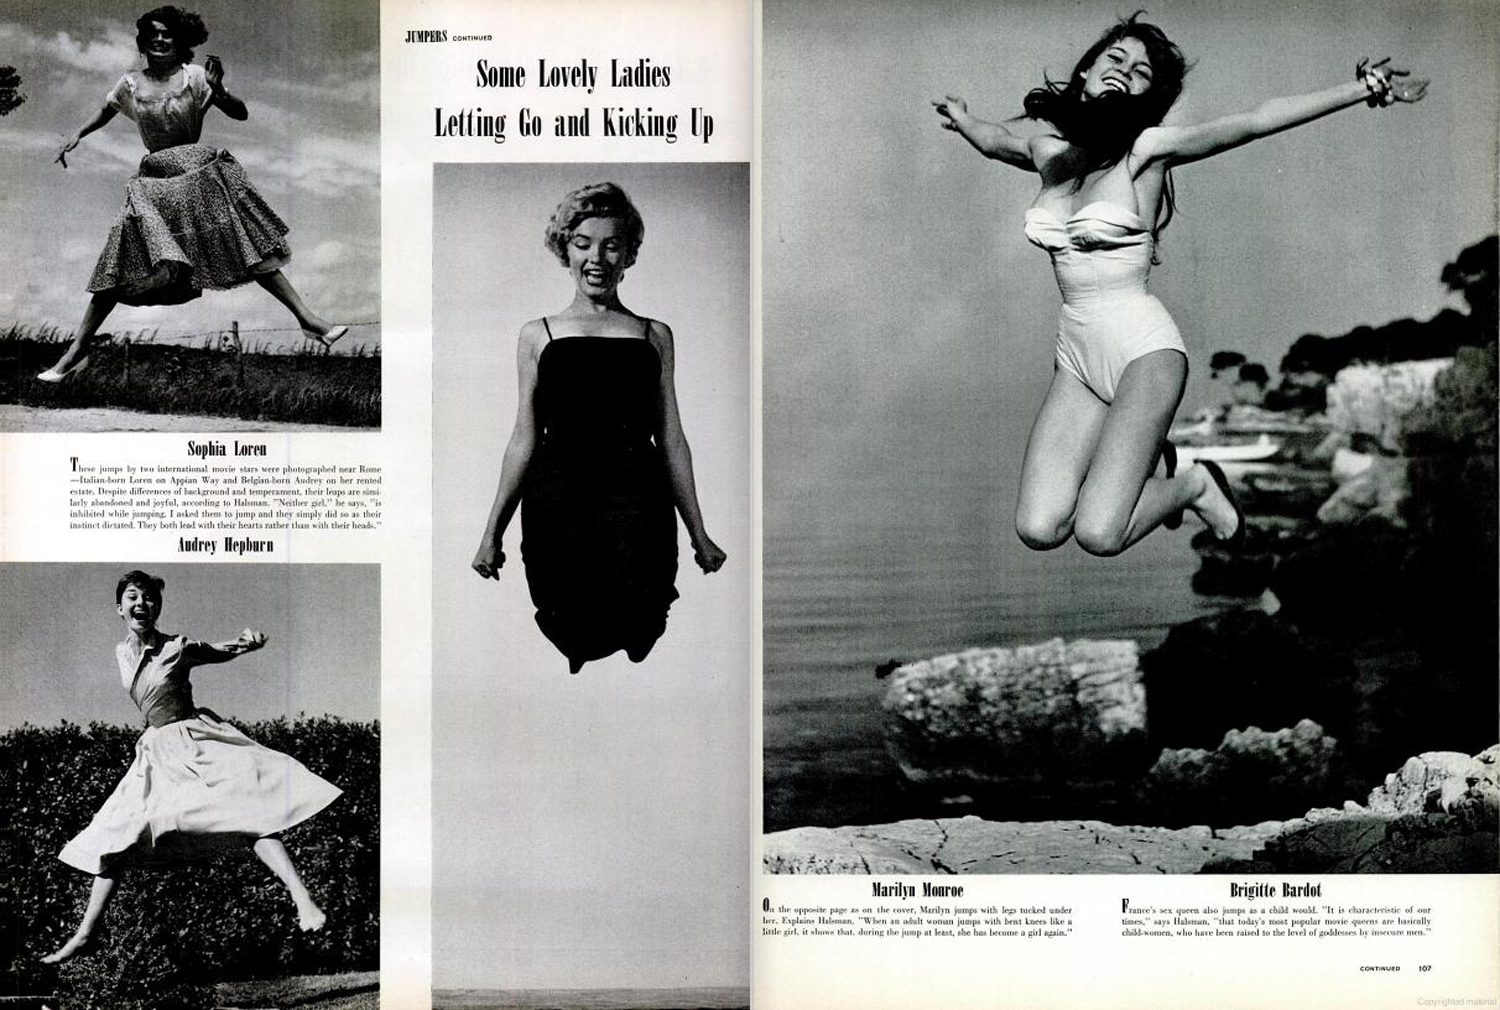 Page spreads from the November 9, 1959, issue of LIFE Magazine.